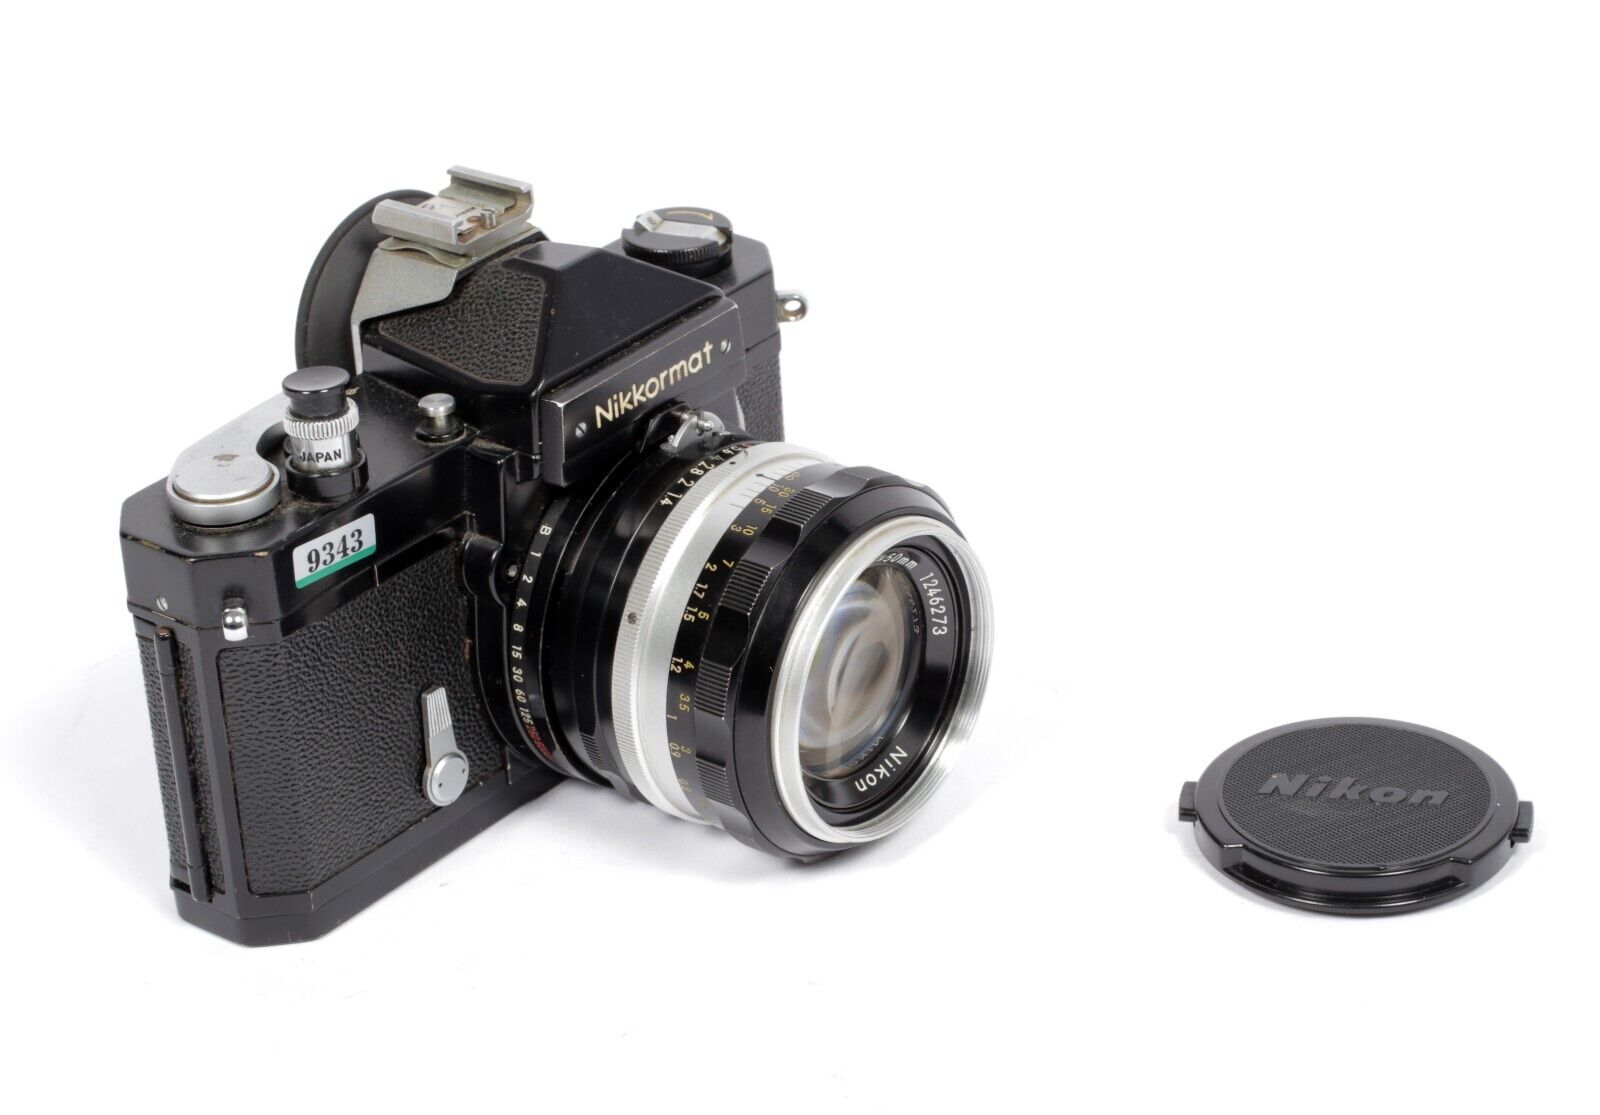 35mm Cameras and Lenses | CatLABS